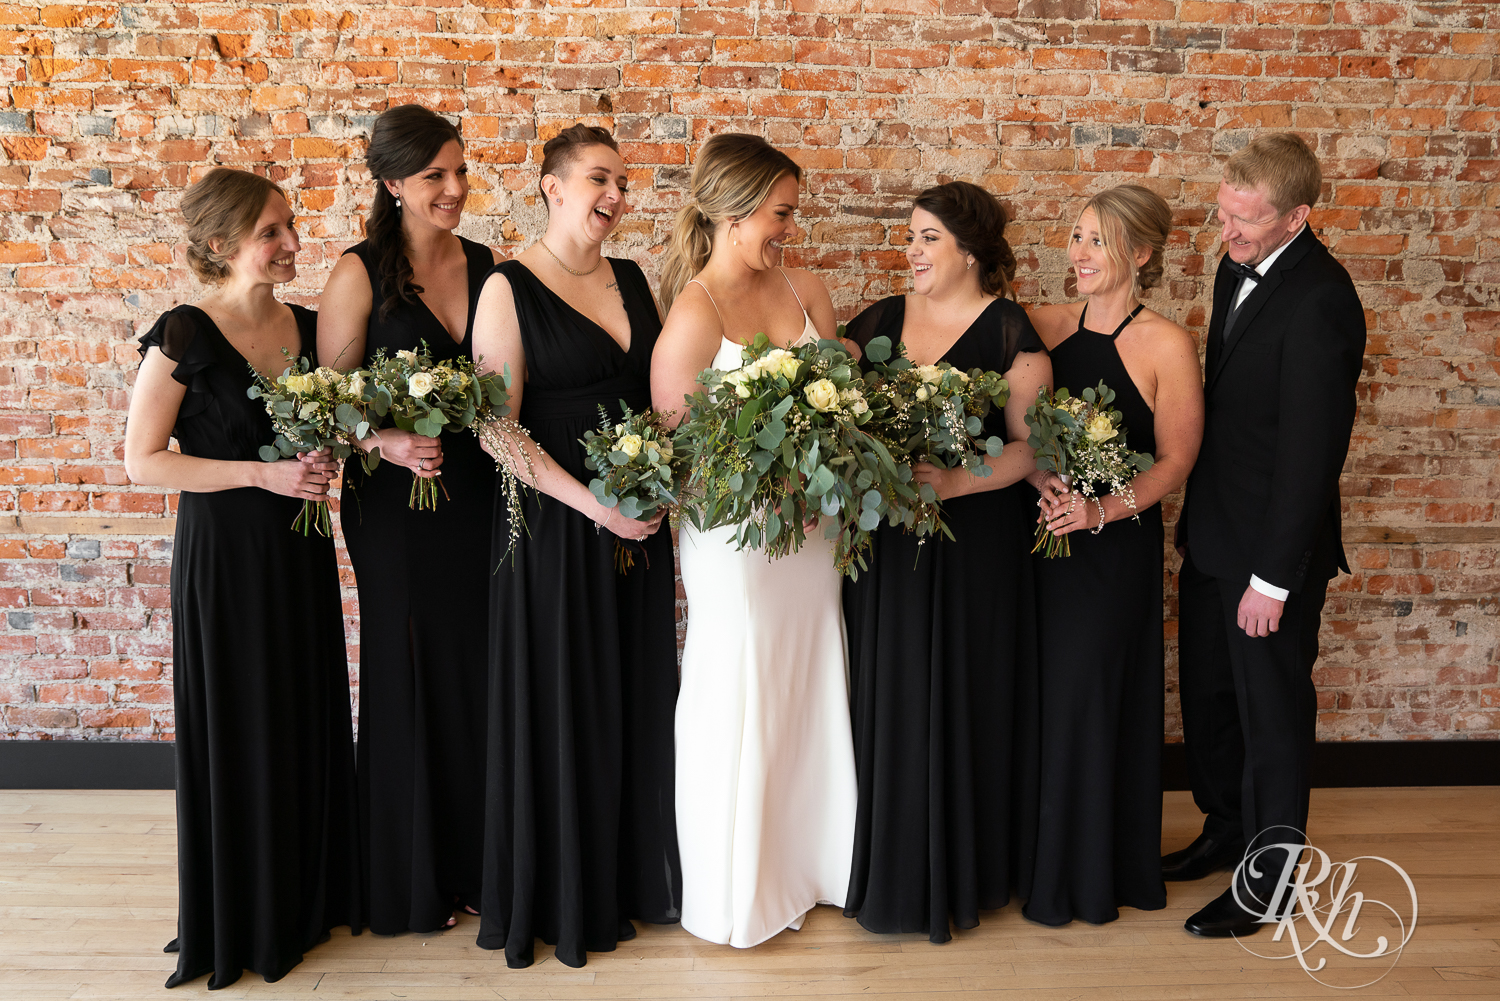 Wedding party in black suits and dresses smile at the 3 Ten Event Center in Faribault, Minnesota.